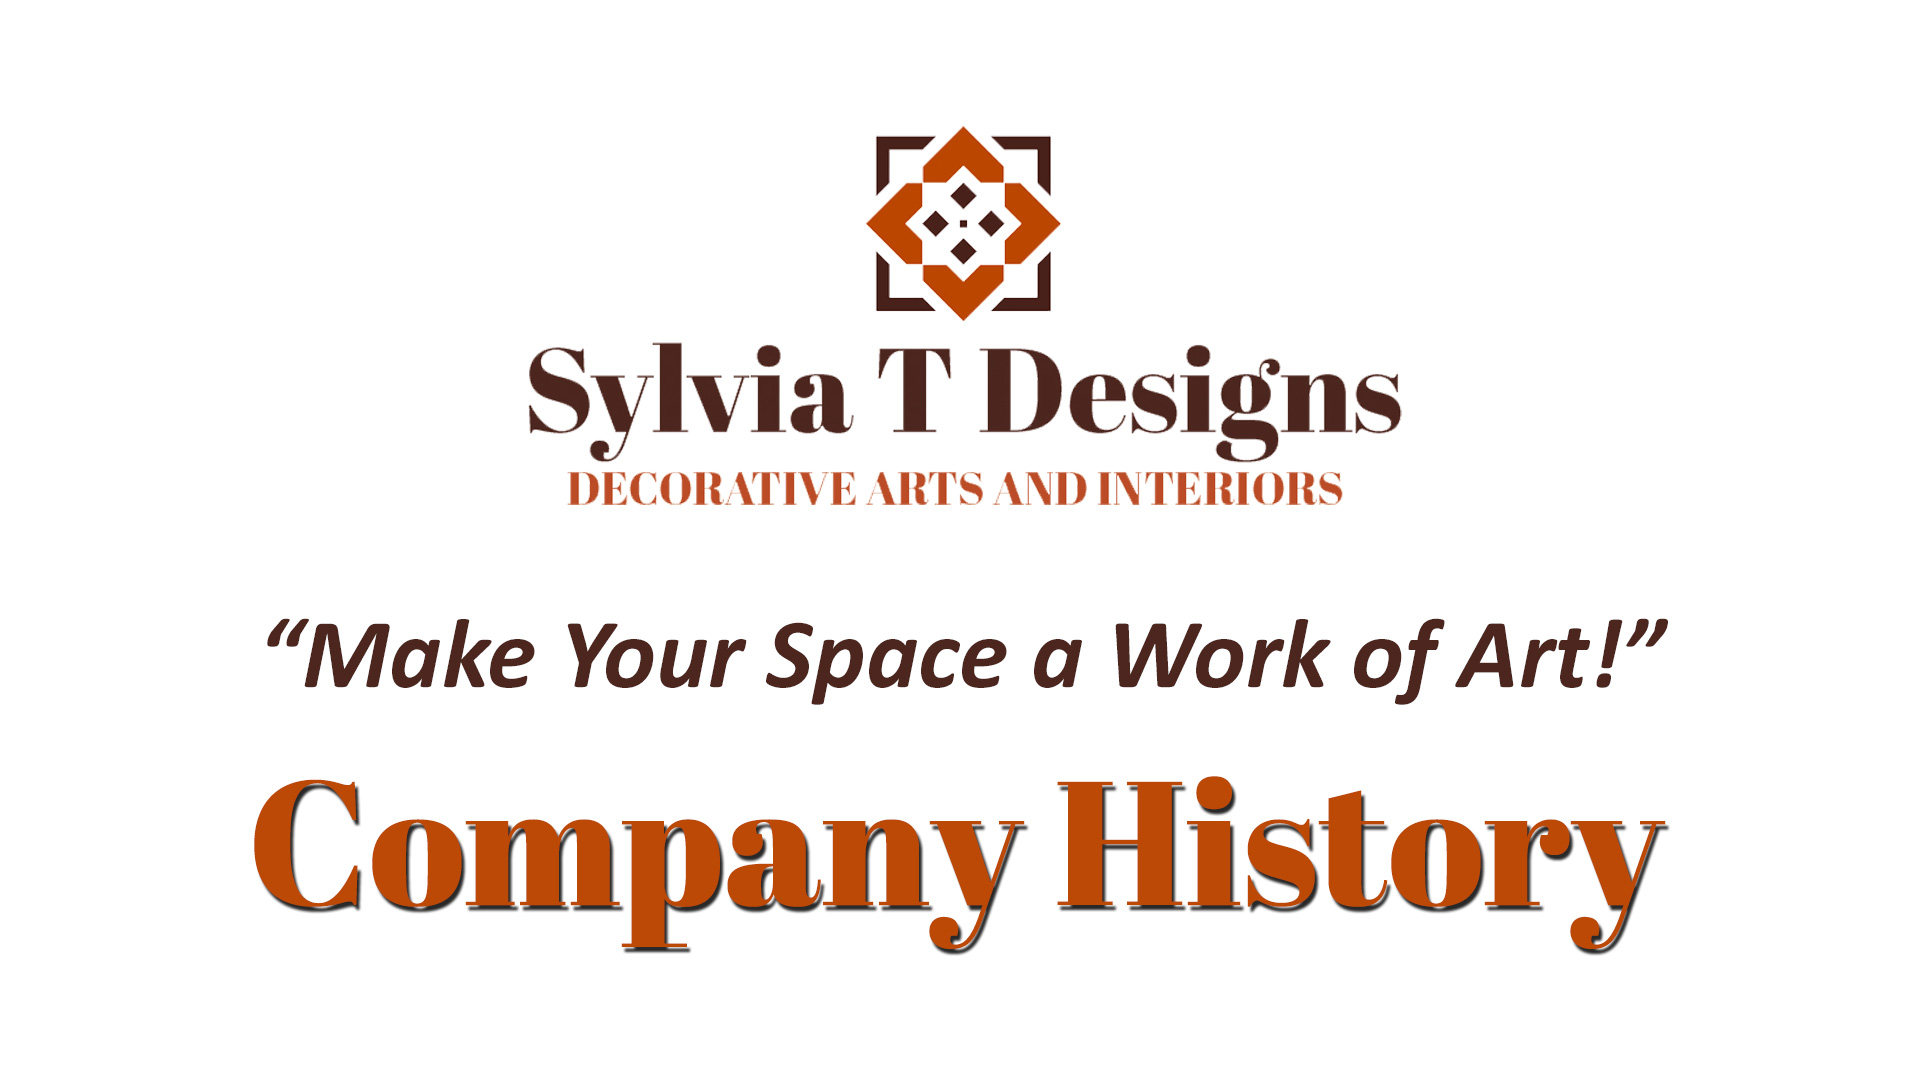 Company History - Sylvia T Designs. Plaster. Decorative Plaster. Decorative Arts. Functional Plaster. Murals. Gilding. Stencils. Cabinetry and Furniture Refinishing. New Orleans. Baton Rouge. Gulf South.